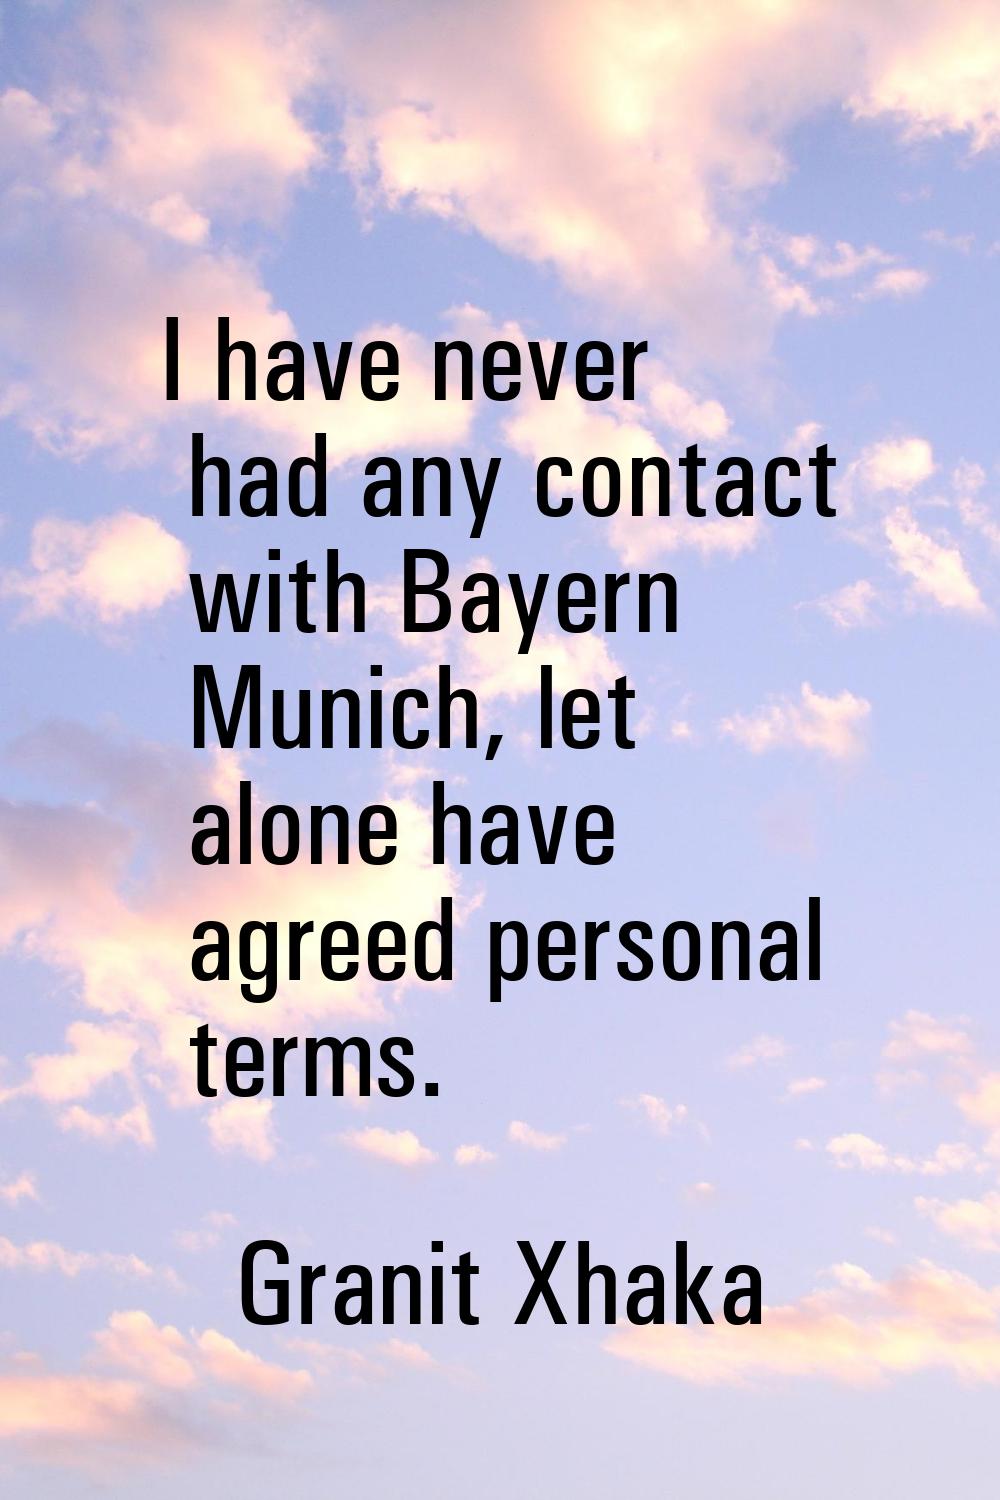 I have never had any contact with Bayern Munich, let alone have agreed personal terms.